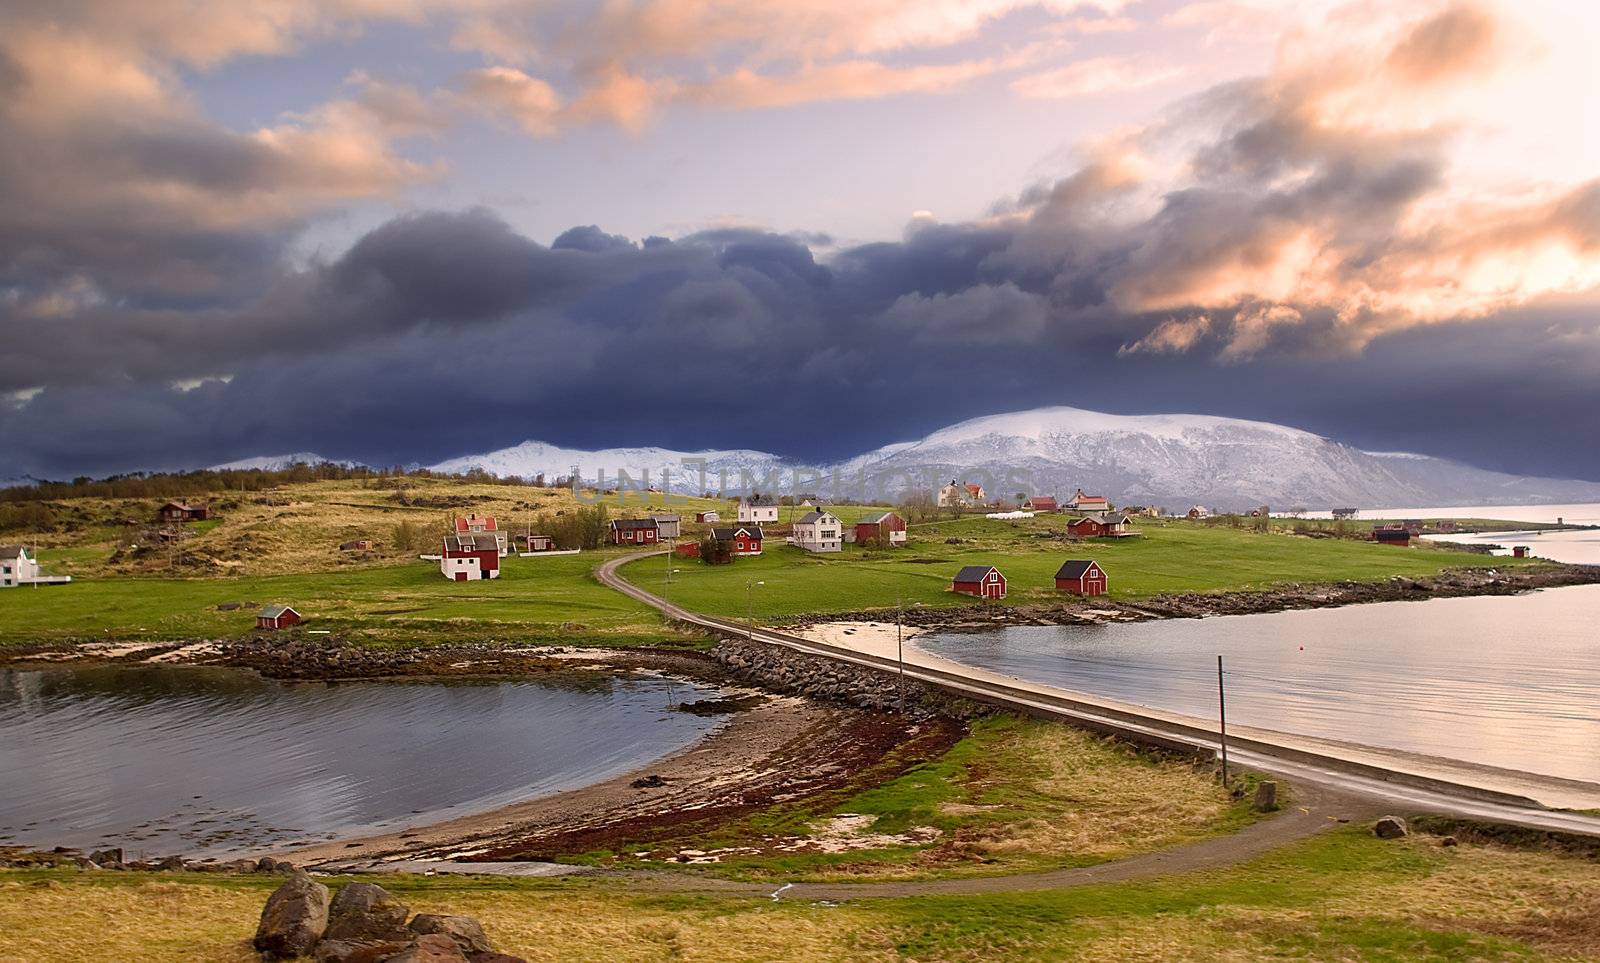 Norwegian village in the mountains with a gloomy sky